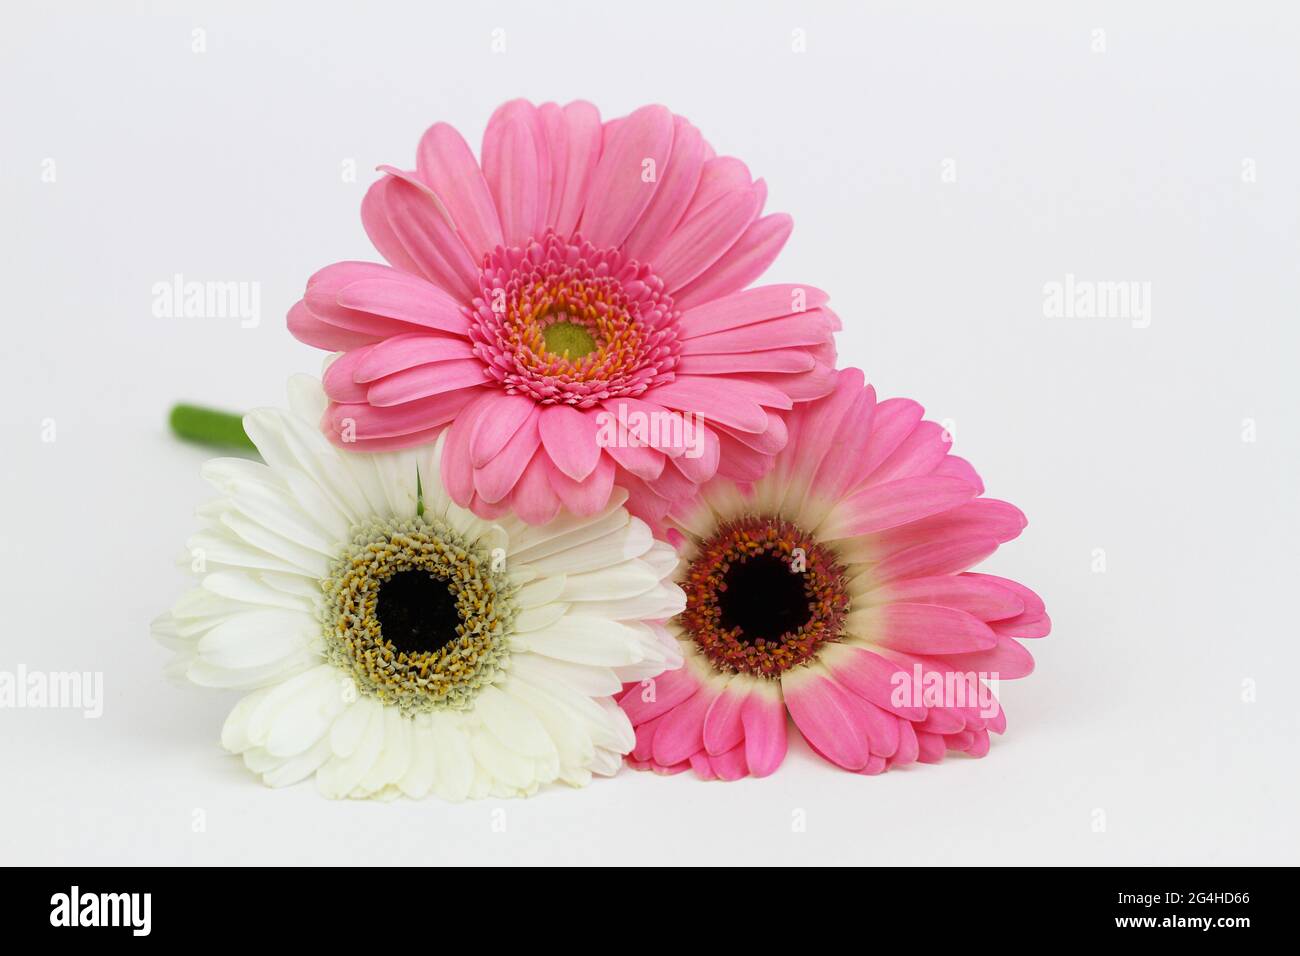 Three pink and white gerbera daisies on white background with copy space Stock Photo